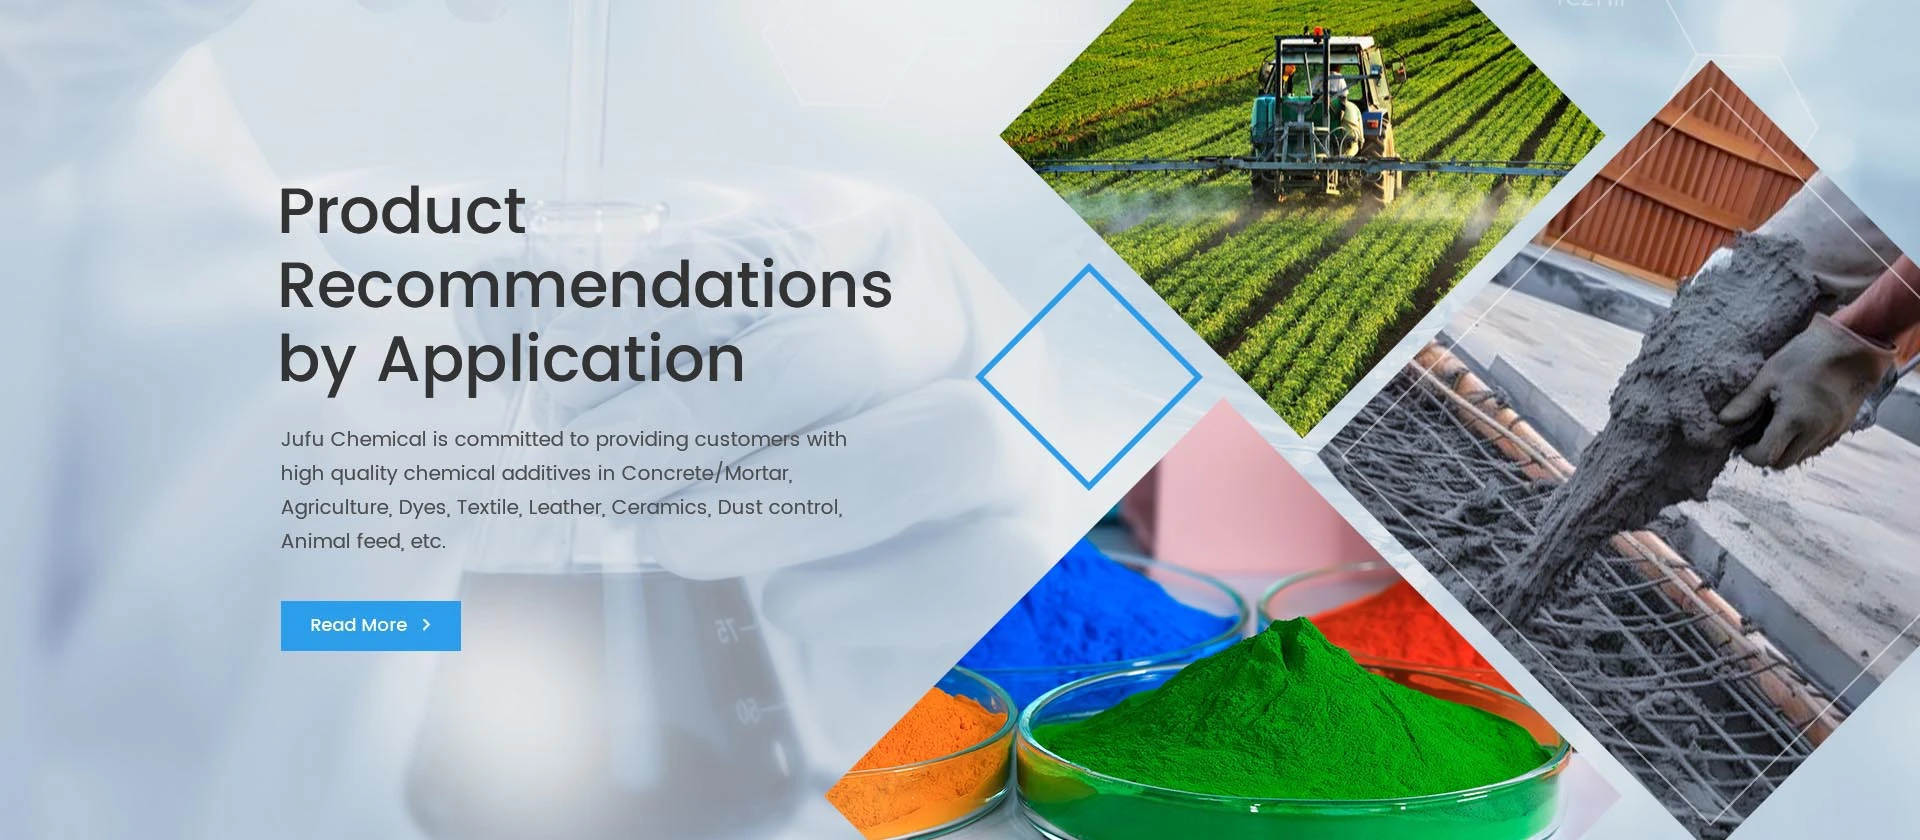 Construction Chemical Products Recommendations by Application